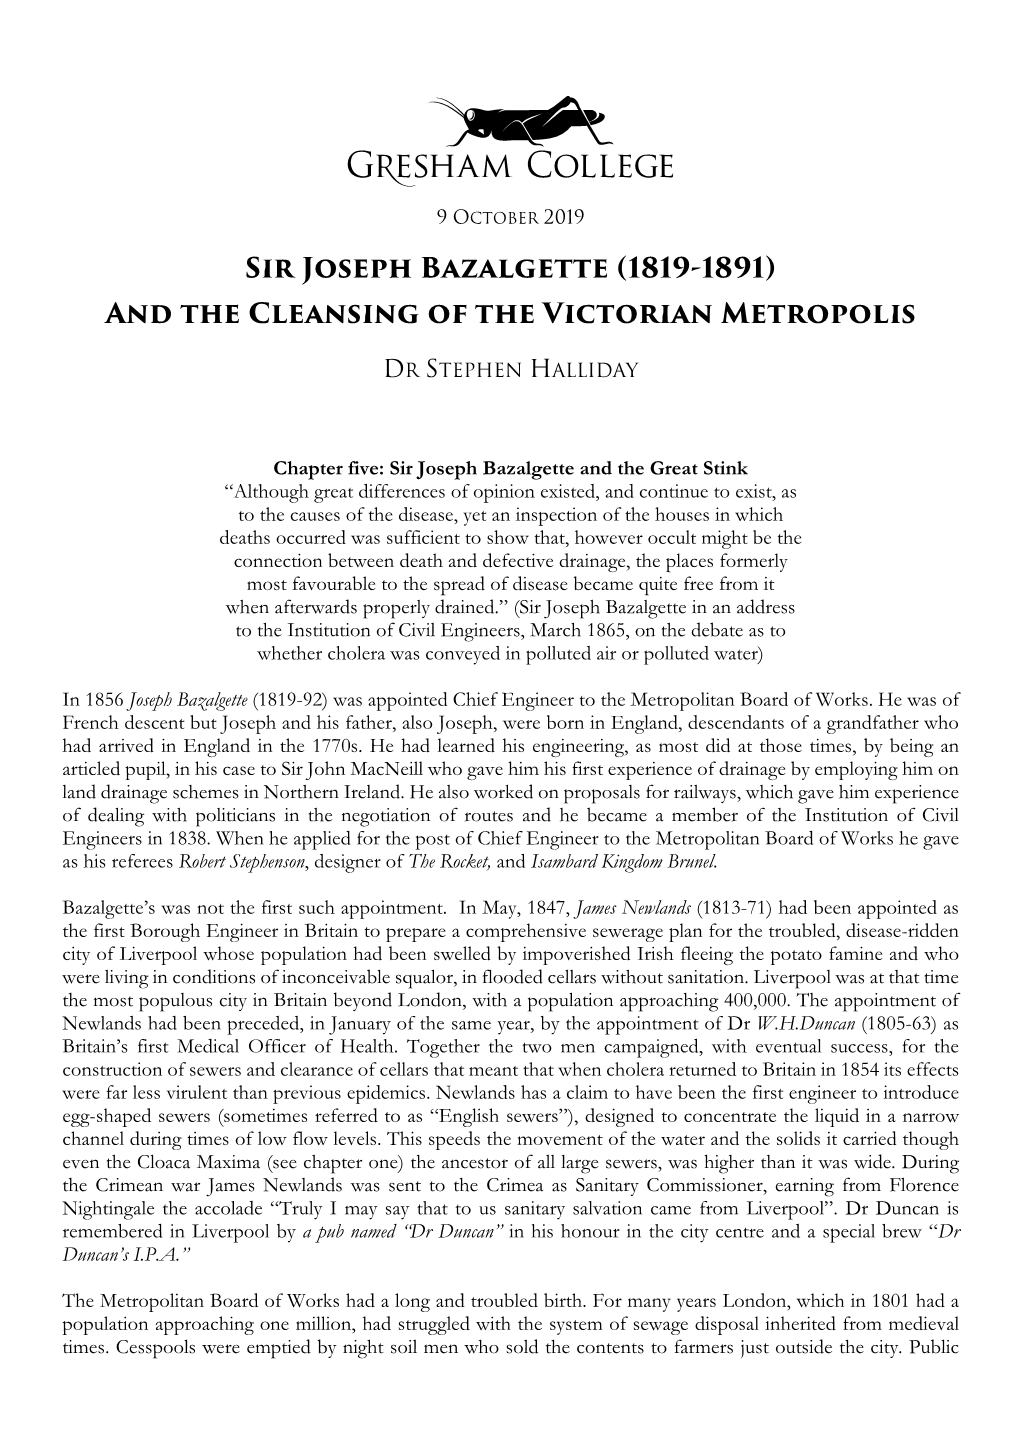 Sir Joseph Bazalgette (1819-1891) and the Cleansing of the Victorian Metropolis